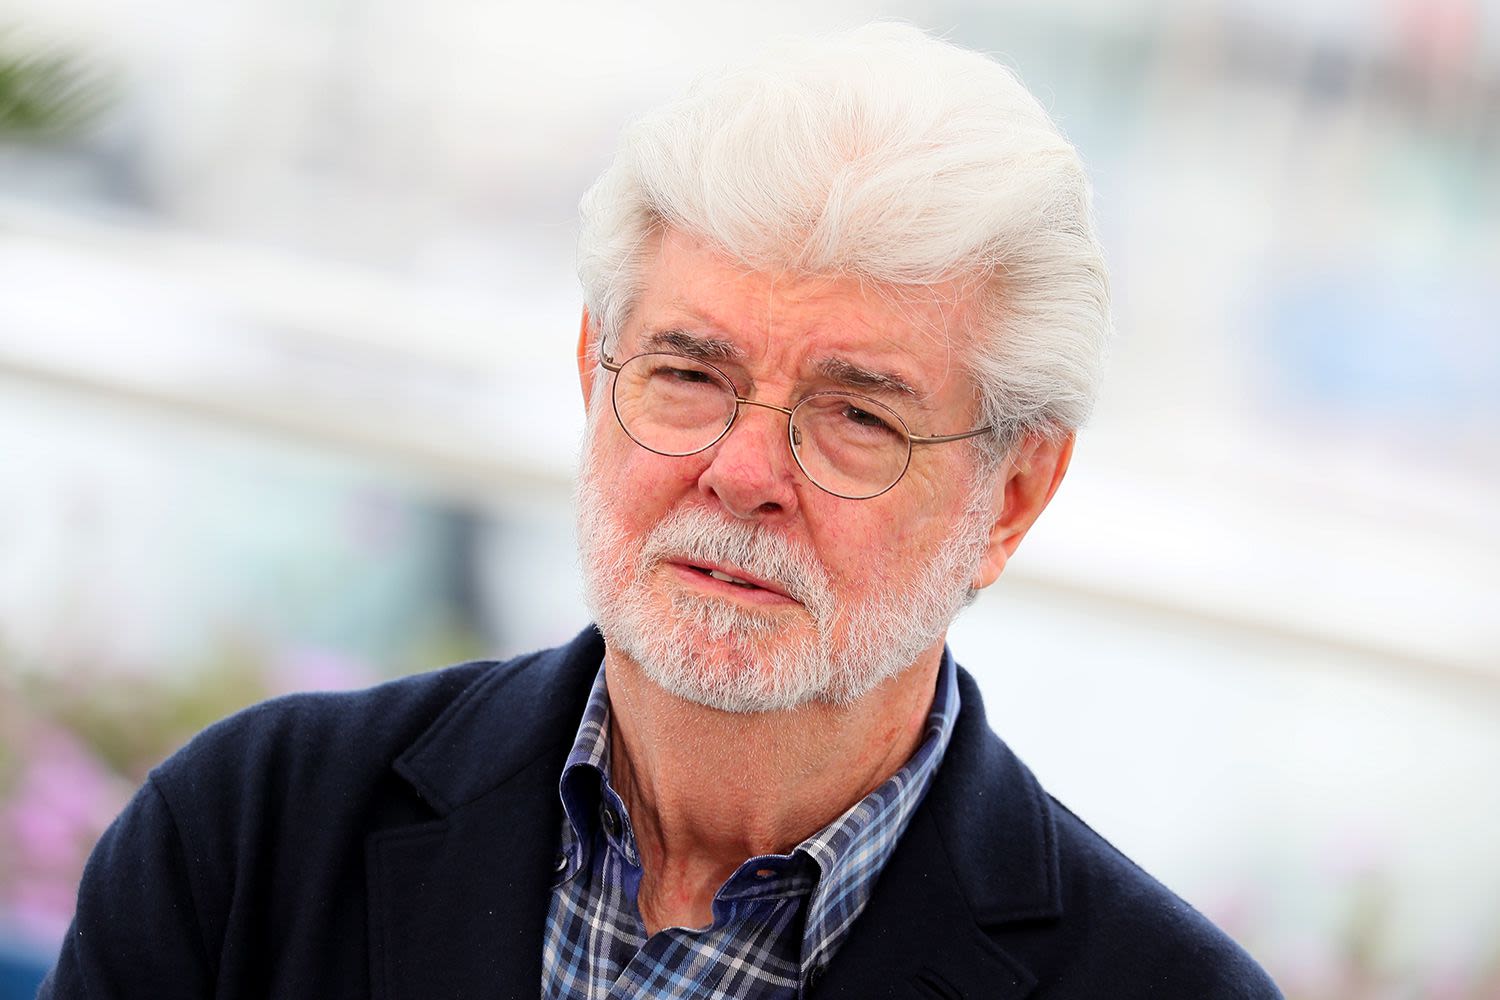 George Lucas defends 'Star Wars' films against criticism that they feature 'all white men'